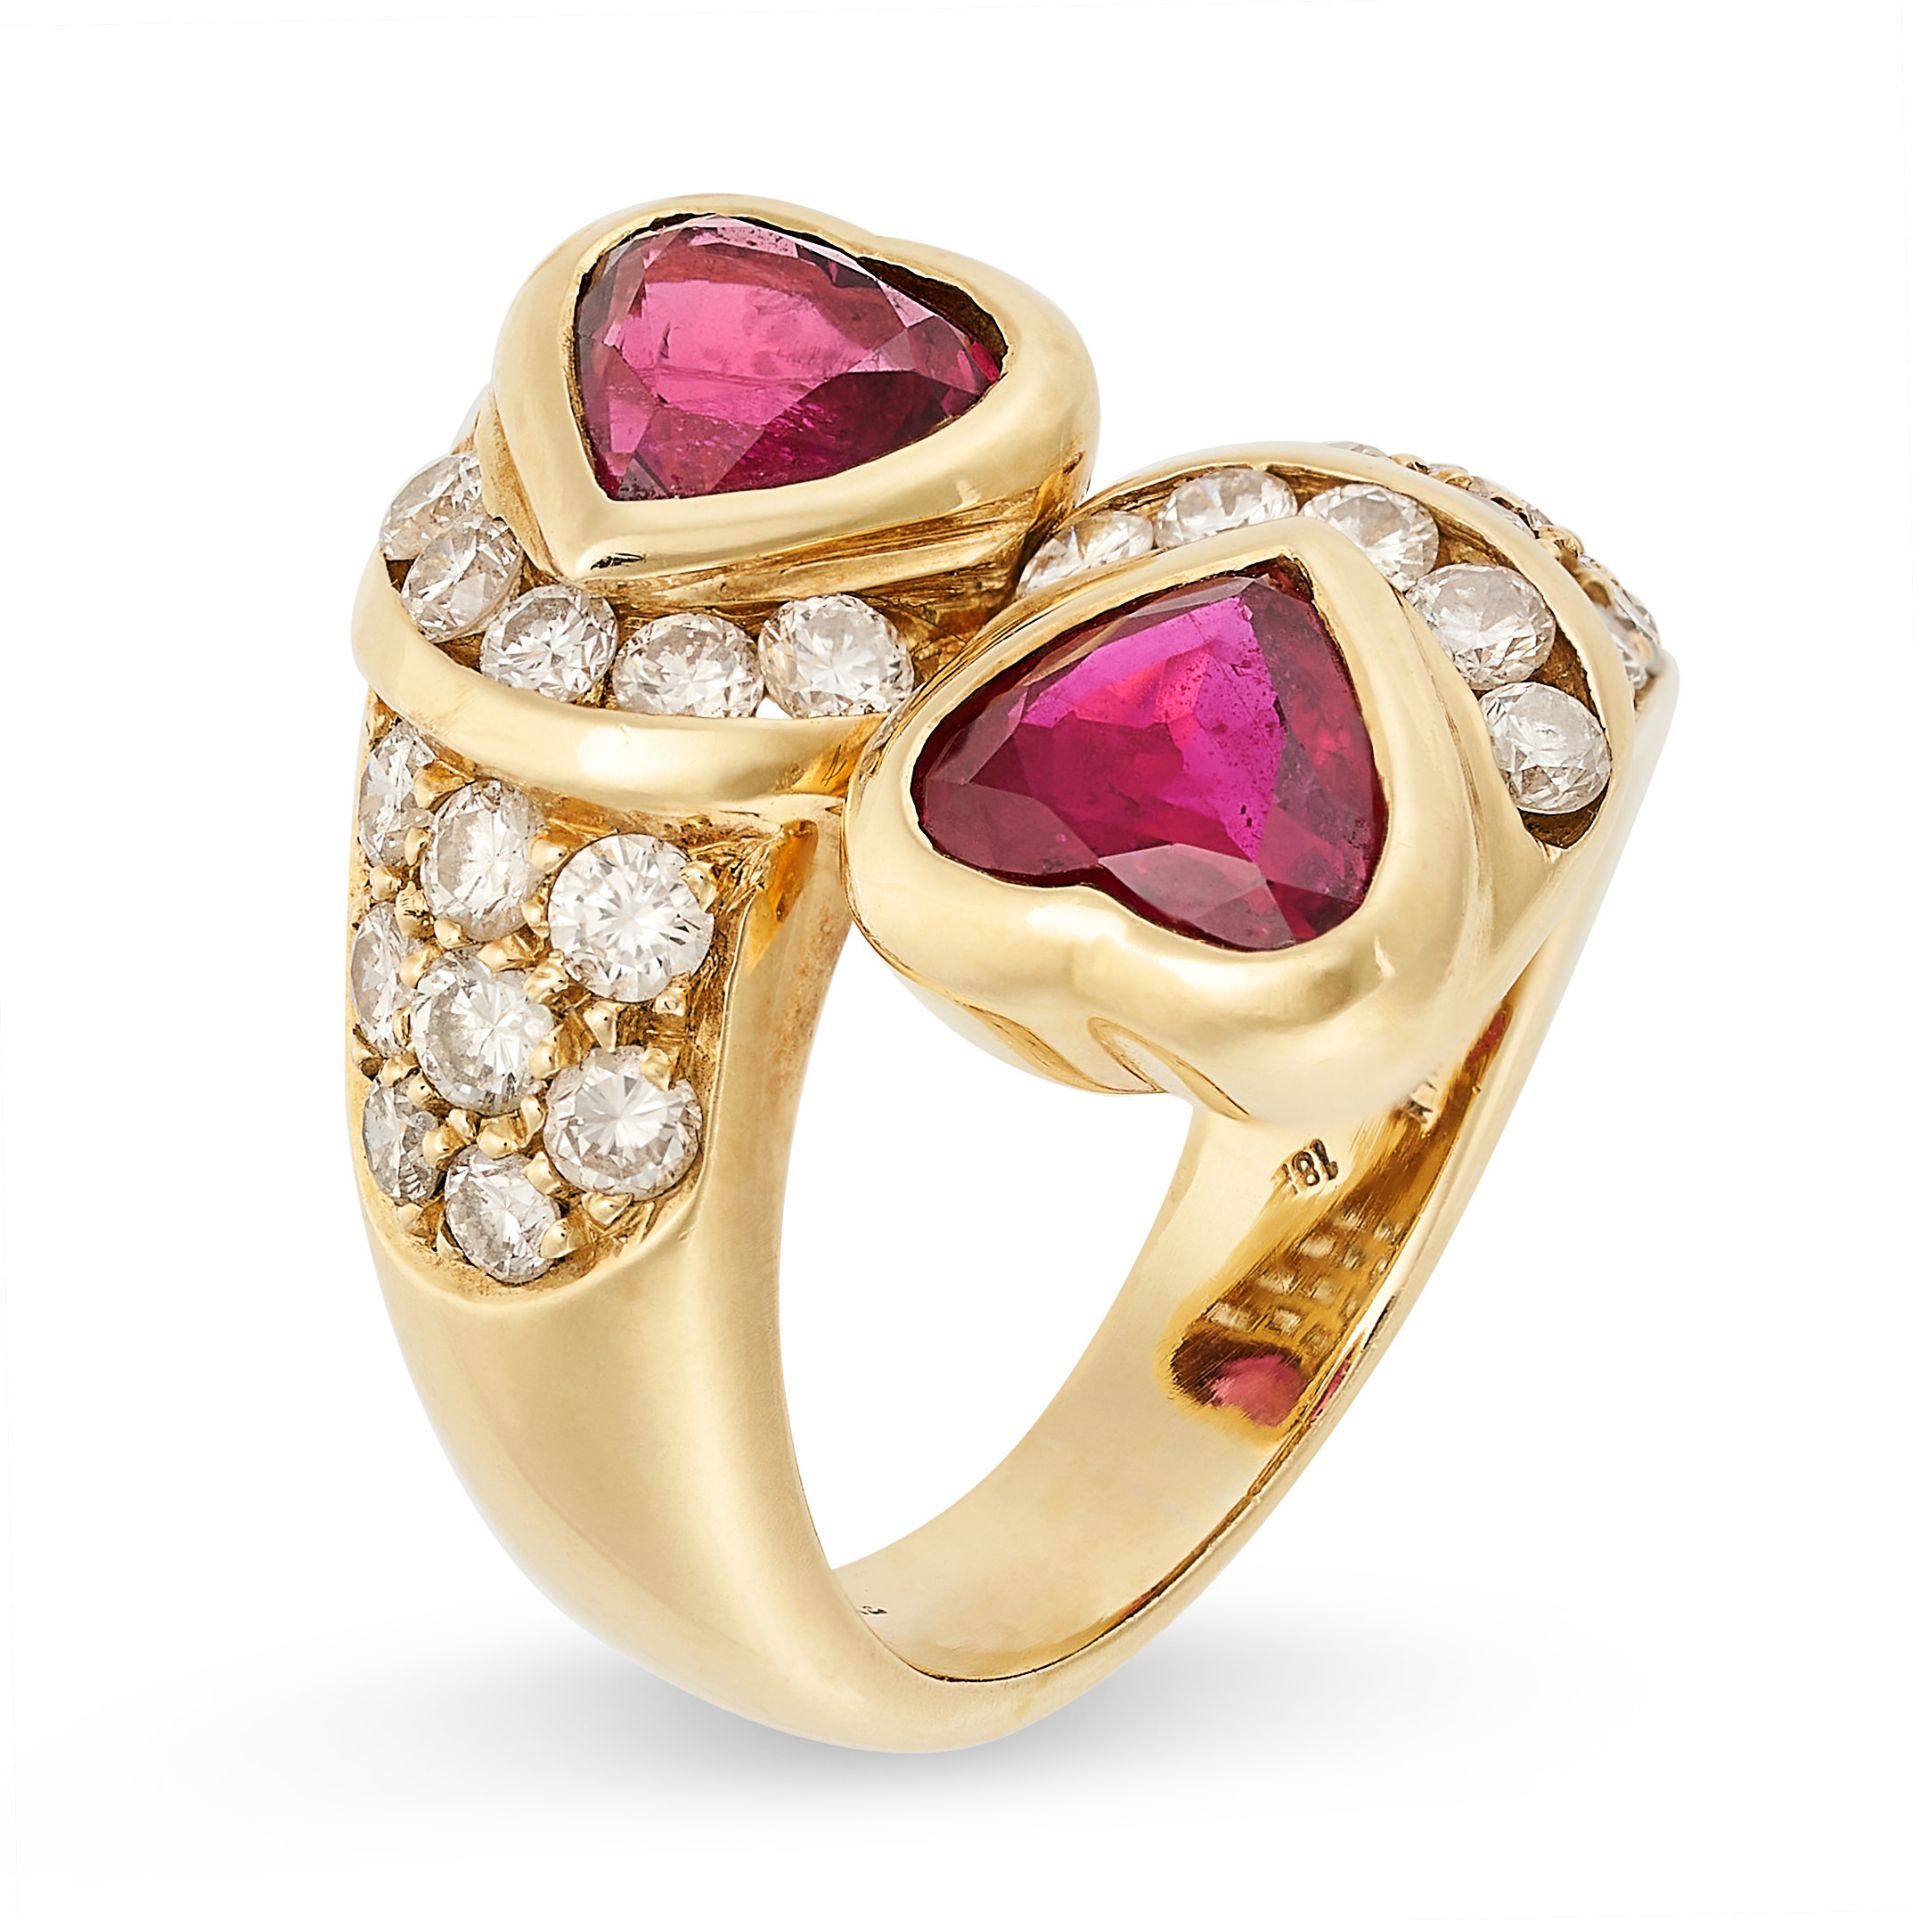 NO RESERVE - A RUBY AND DIAMOND TOI ET MOI RING in 18ct yellow gold, the twisted shank set with t... - Image 2 of 2